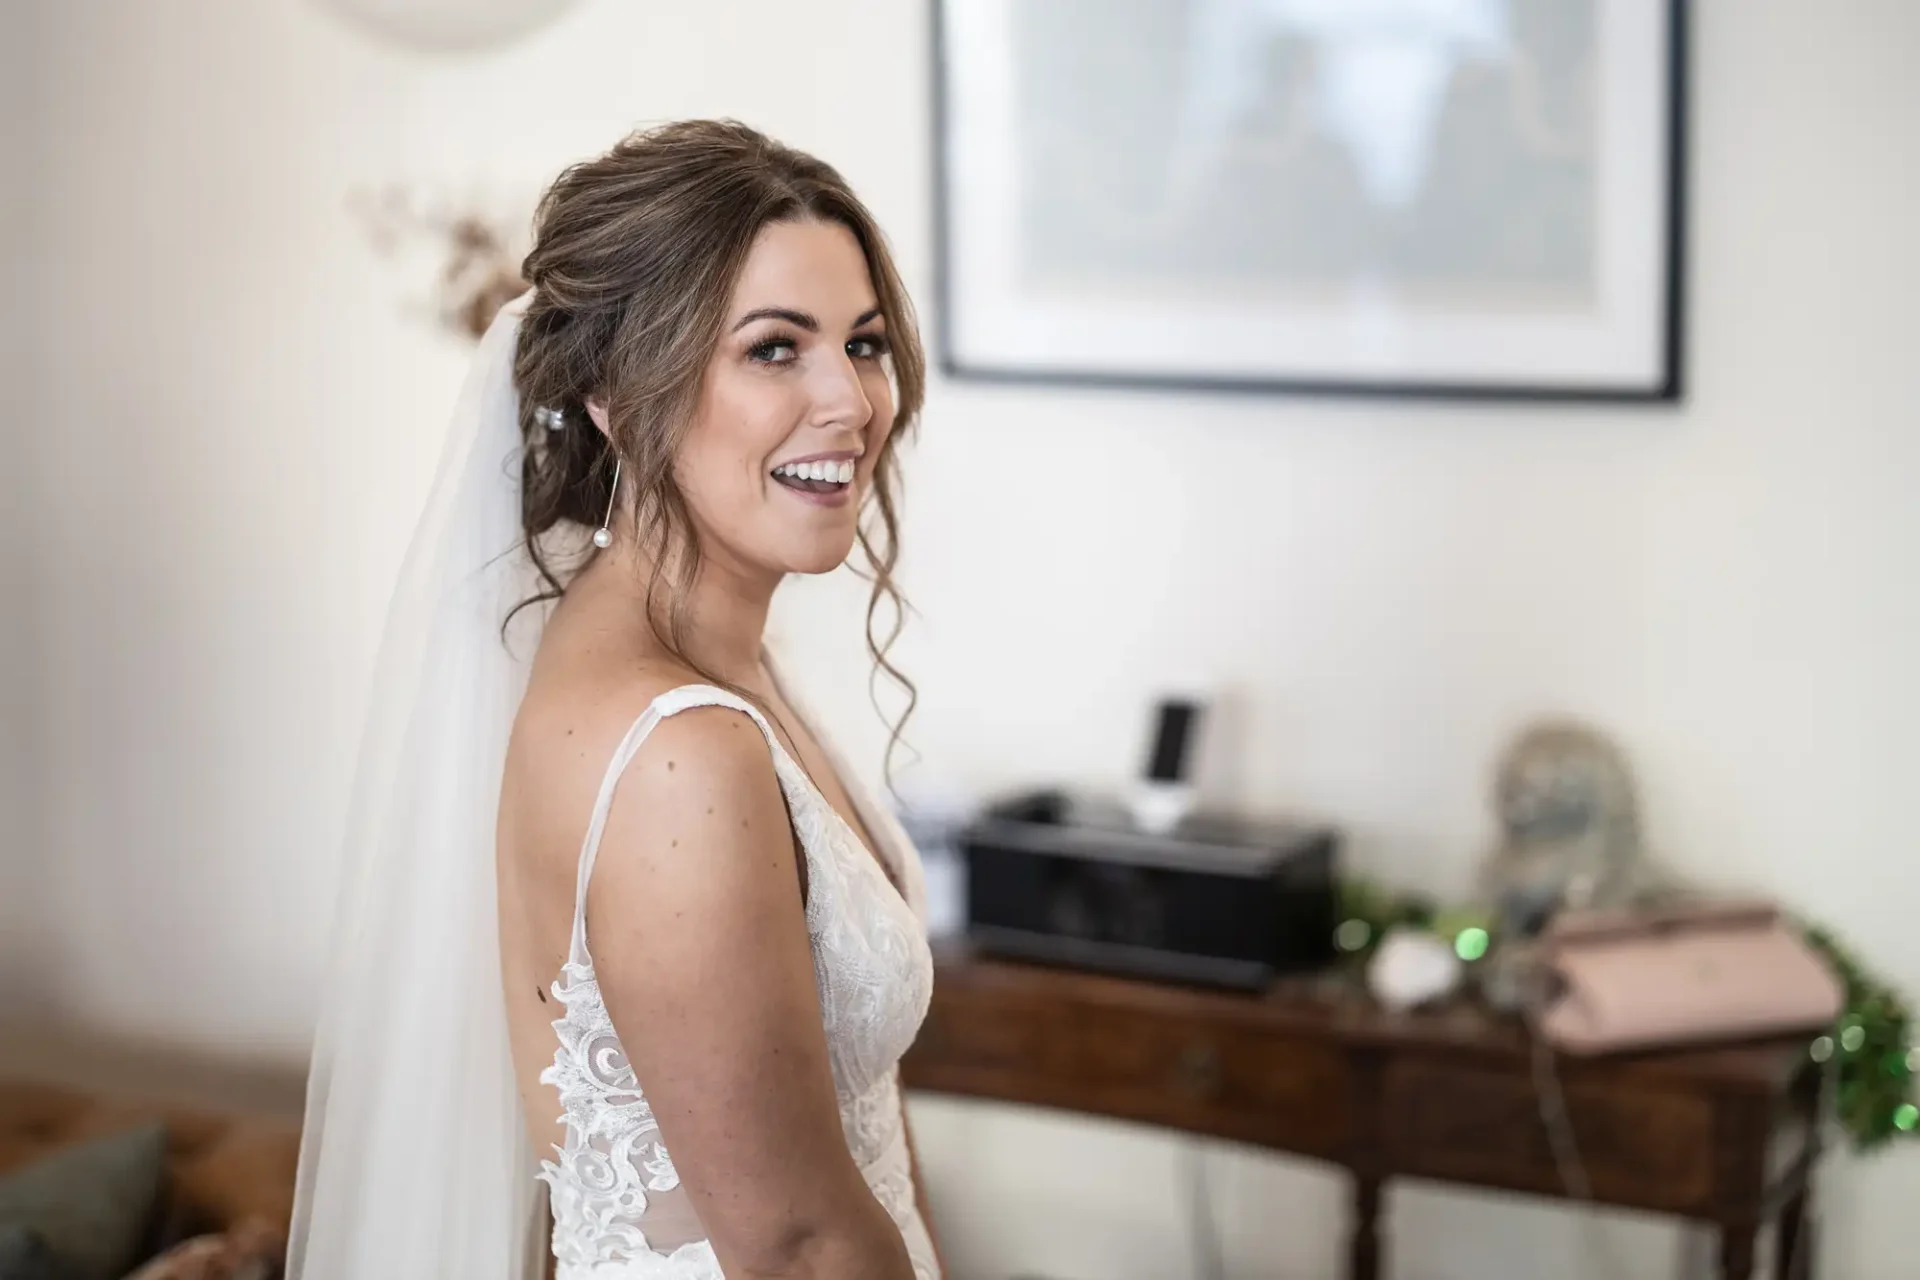 A smiling bride in a lace wedding dress and veil, looking over her shoulder in a tastefully decorated room.